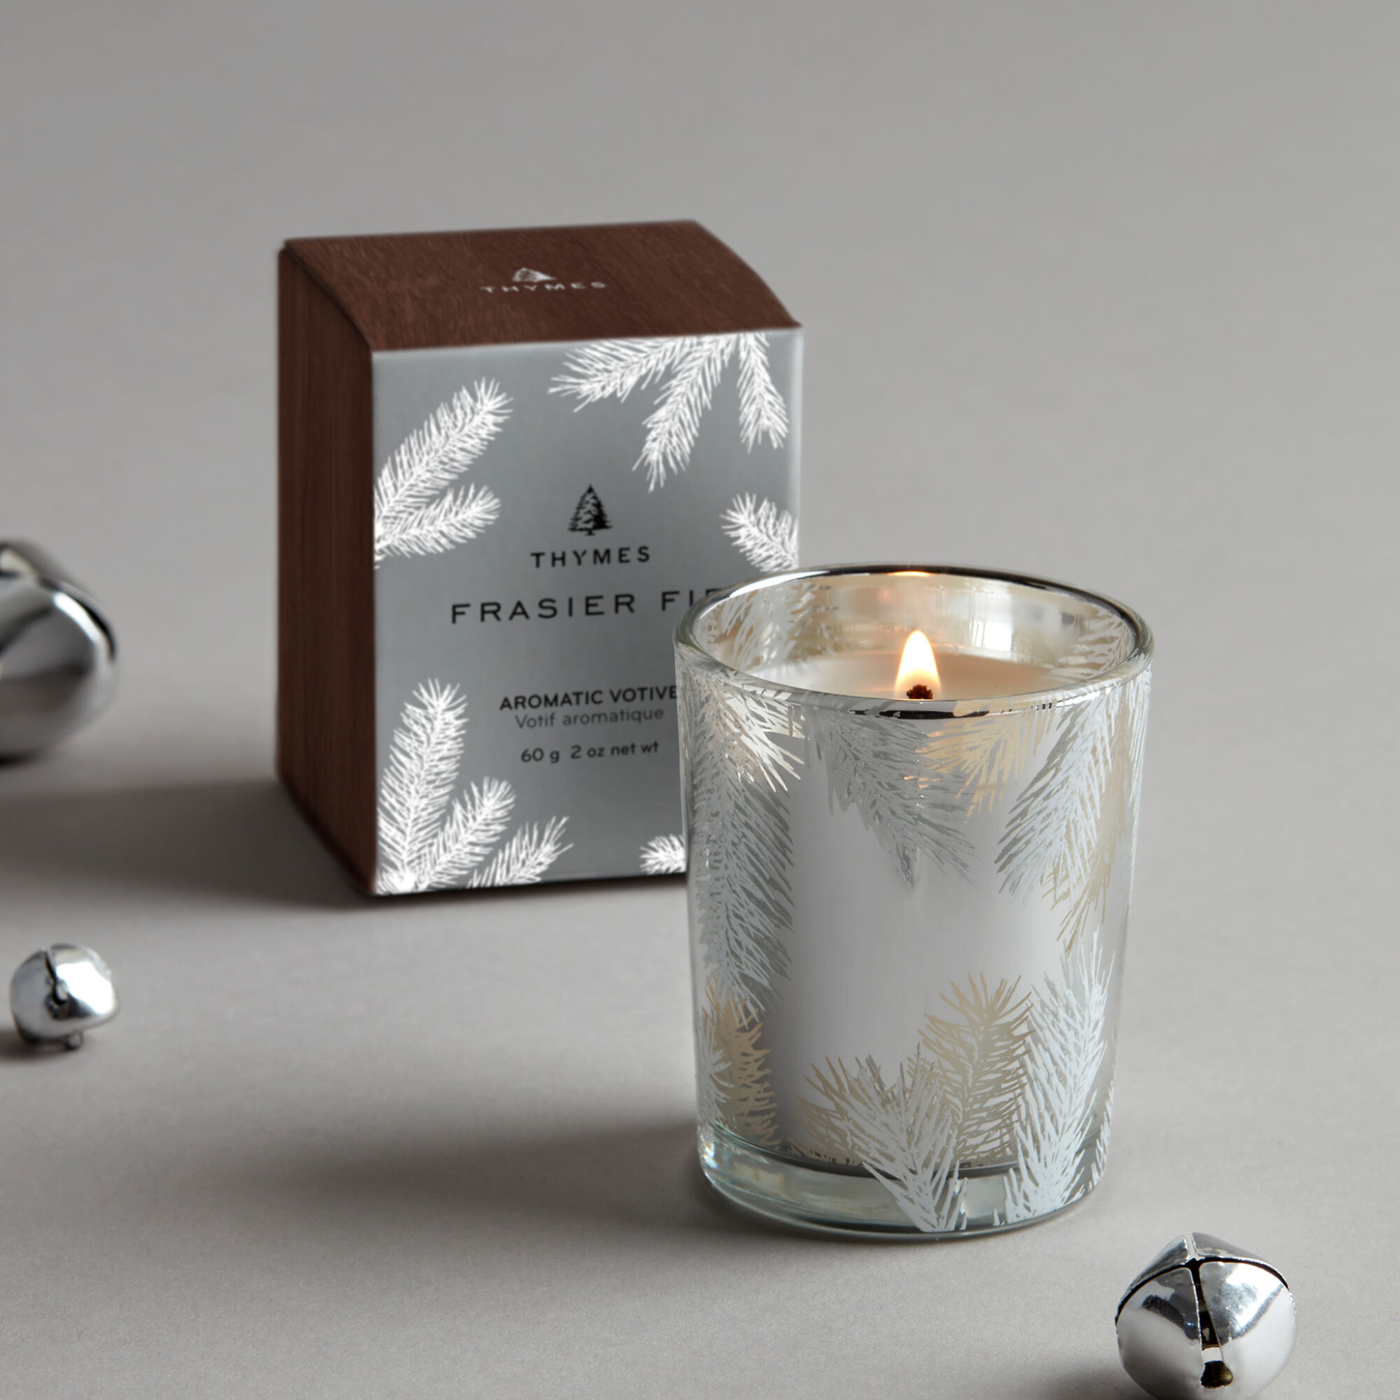 Thymes Frasier Fir Silver Statement Votive Candle